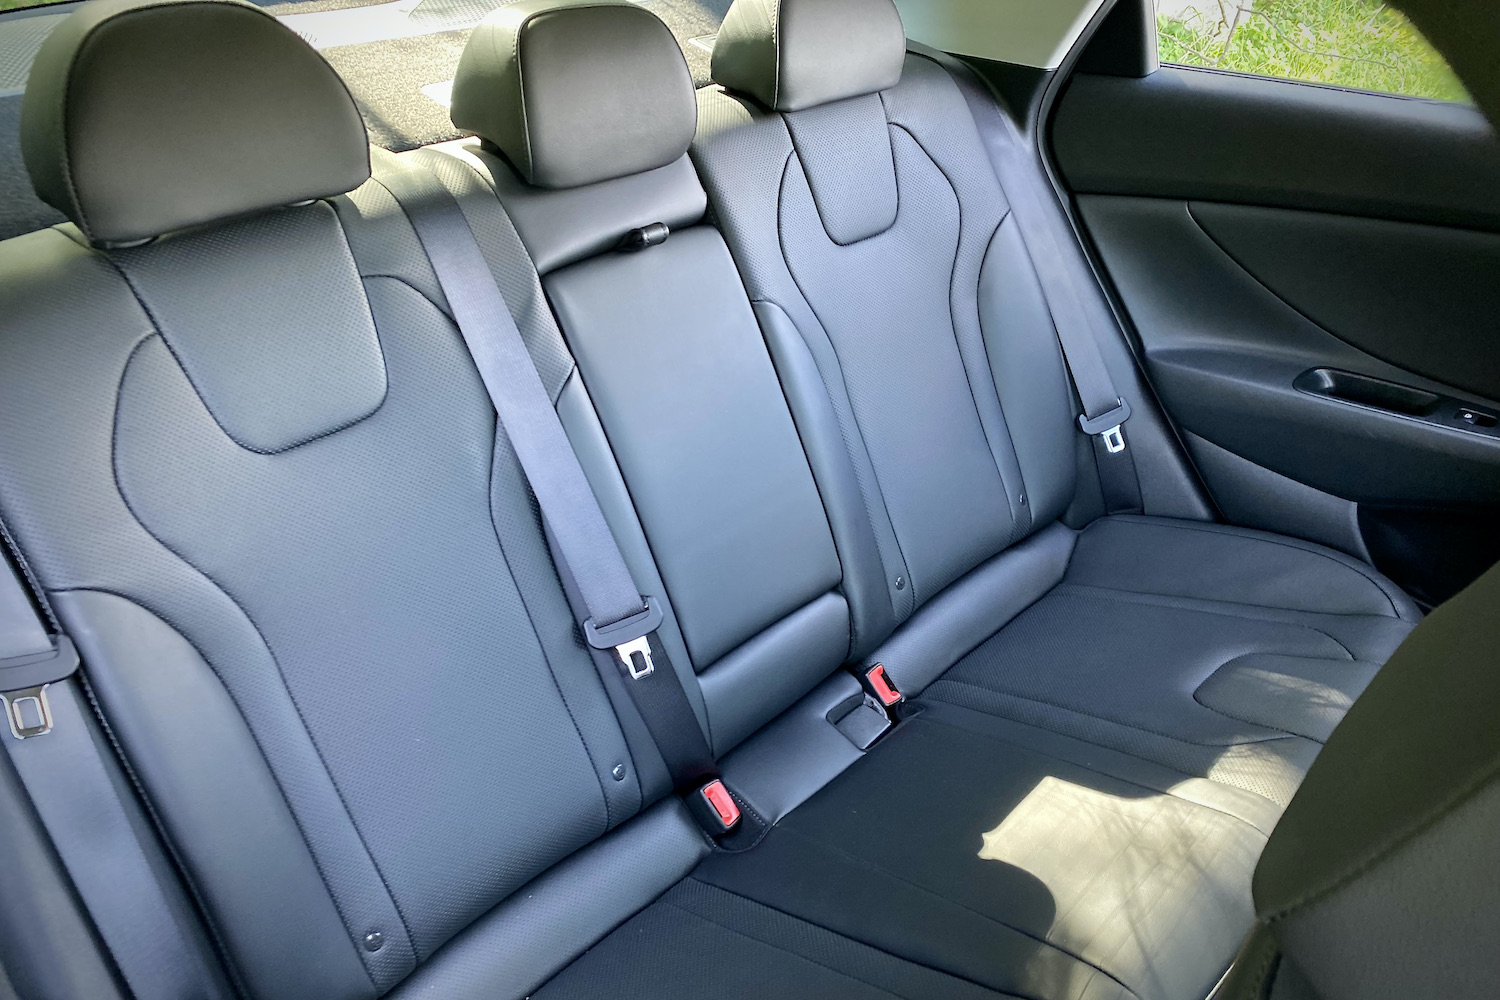 Above view of the rear seats in the 2021 Hyundai Elantra Hybrid from the passenger side.